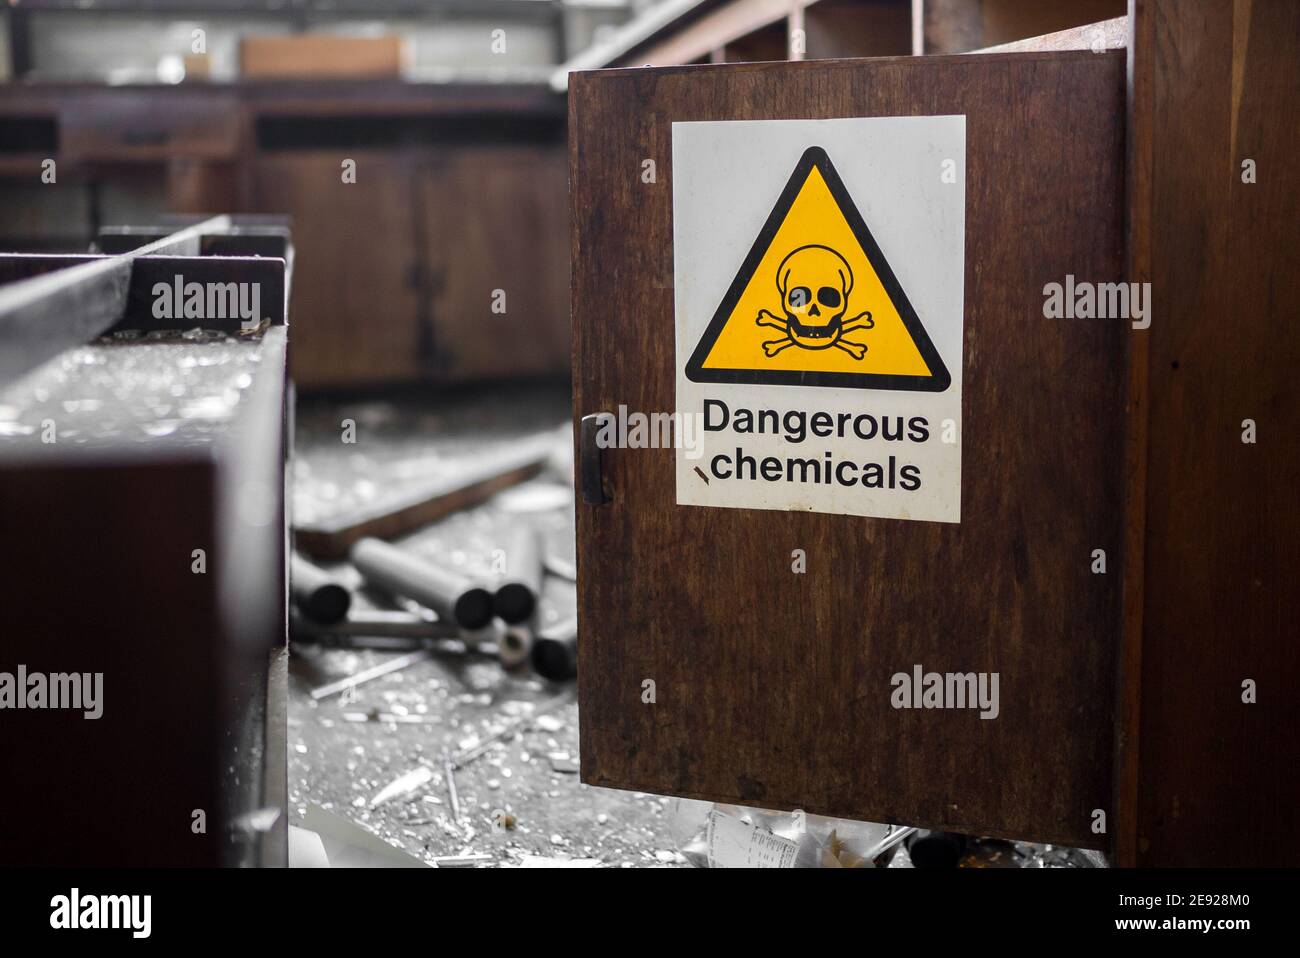 Yellow triangle with black skull and crossbones dangerous chemicals sign on open wooden cupboard door in abandoned laboratory after burglary equipment Stock Photo